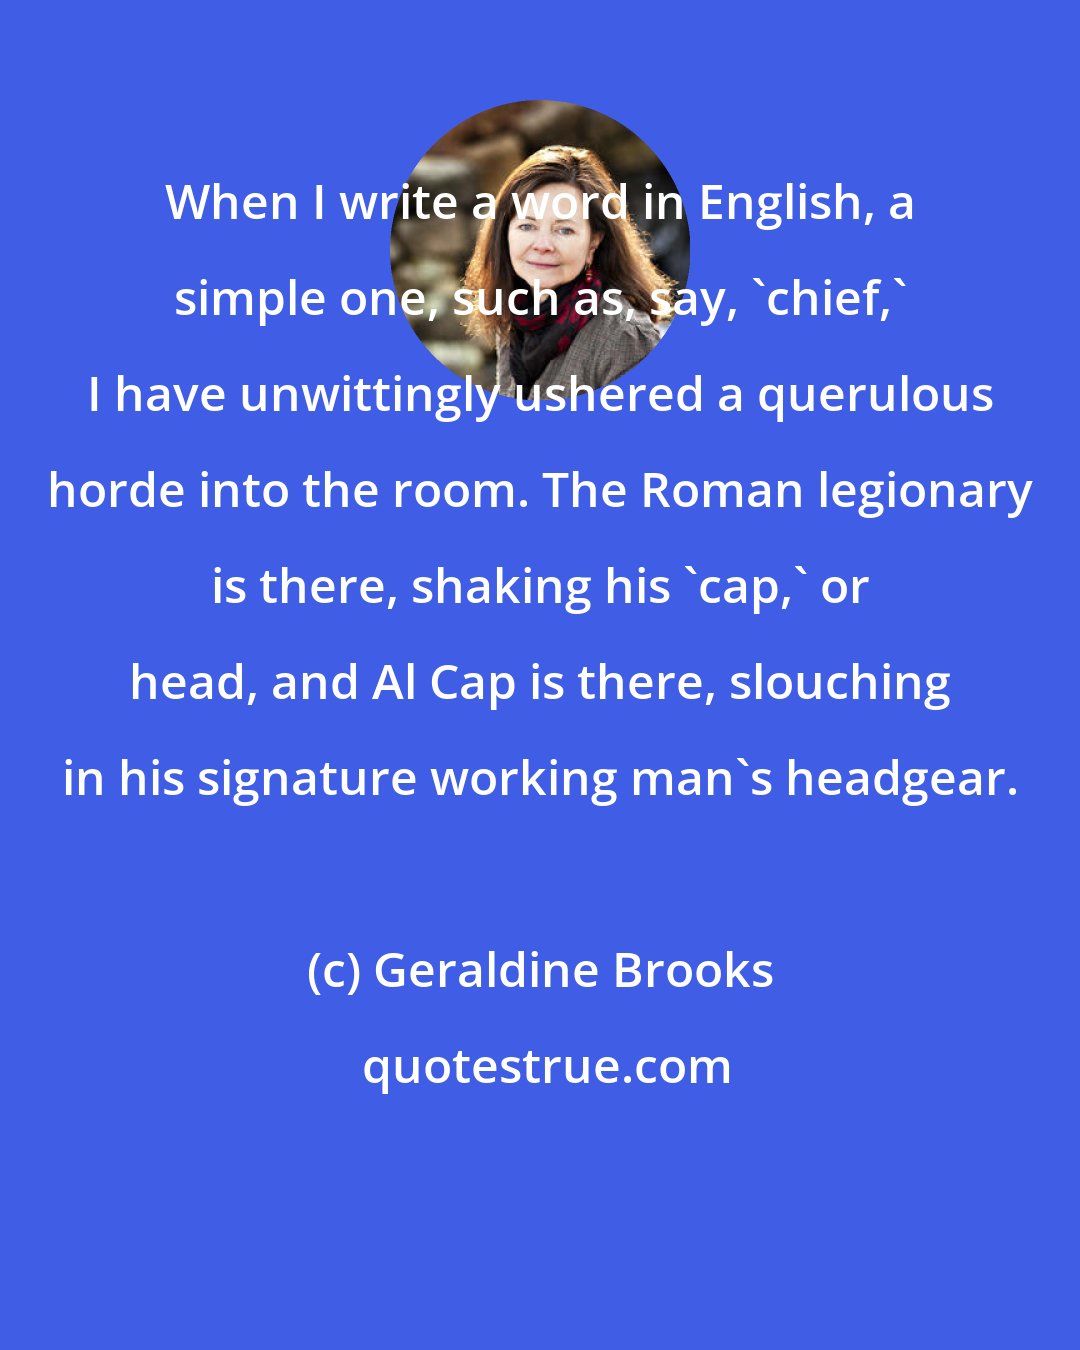 Geraldine Brooks: When I write a word in English, a simple one, such as, say, 'chief,' I have unwittingly ushered a querulous horde into the room. The Roman legionary is there, shaking his 'cap,' or head, and Al Cap is there, slouching in his signature working man's headgear.